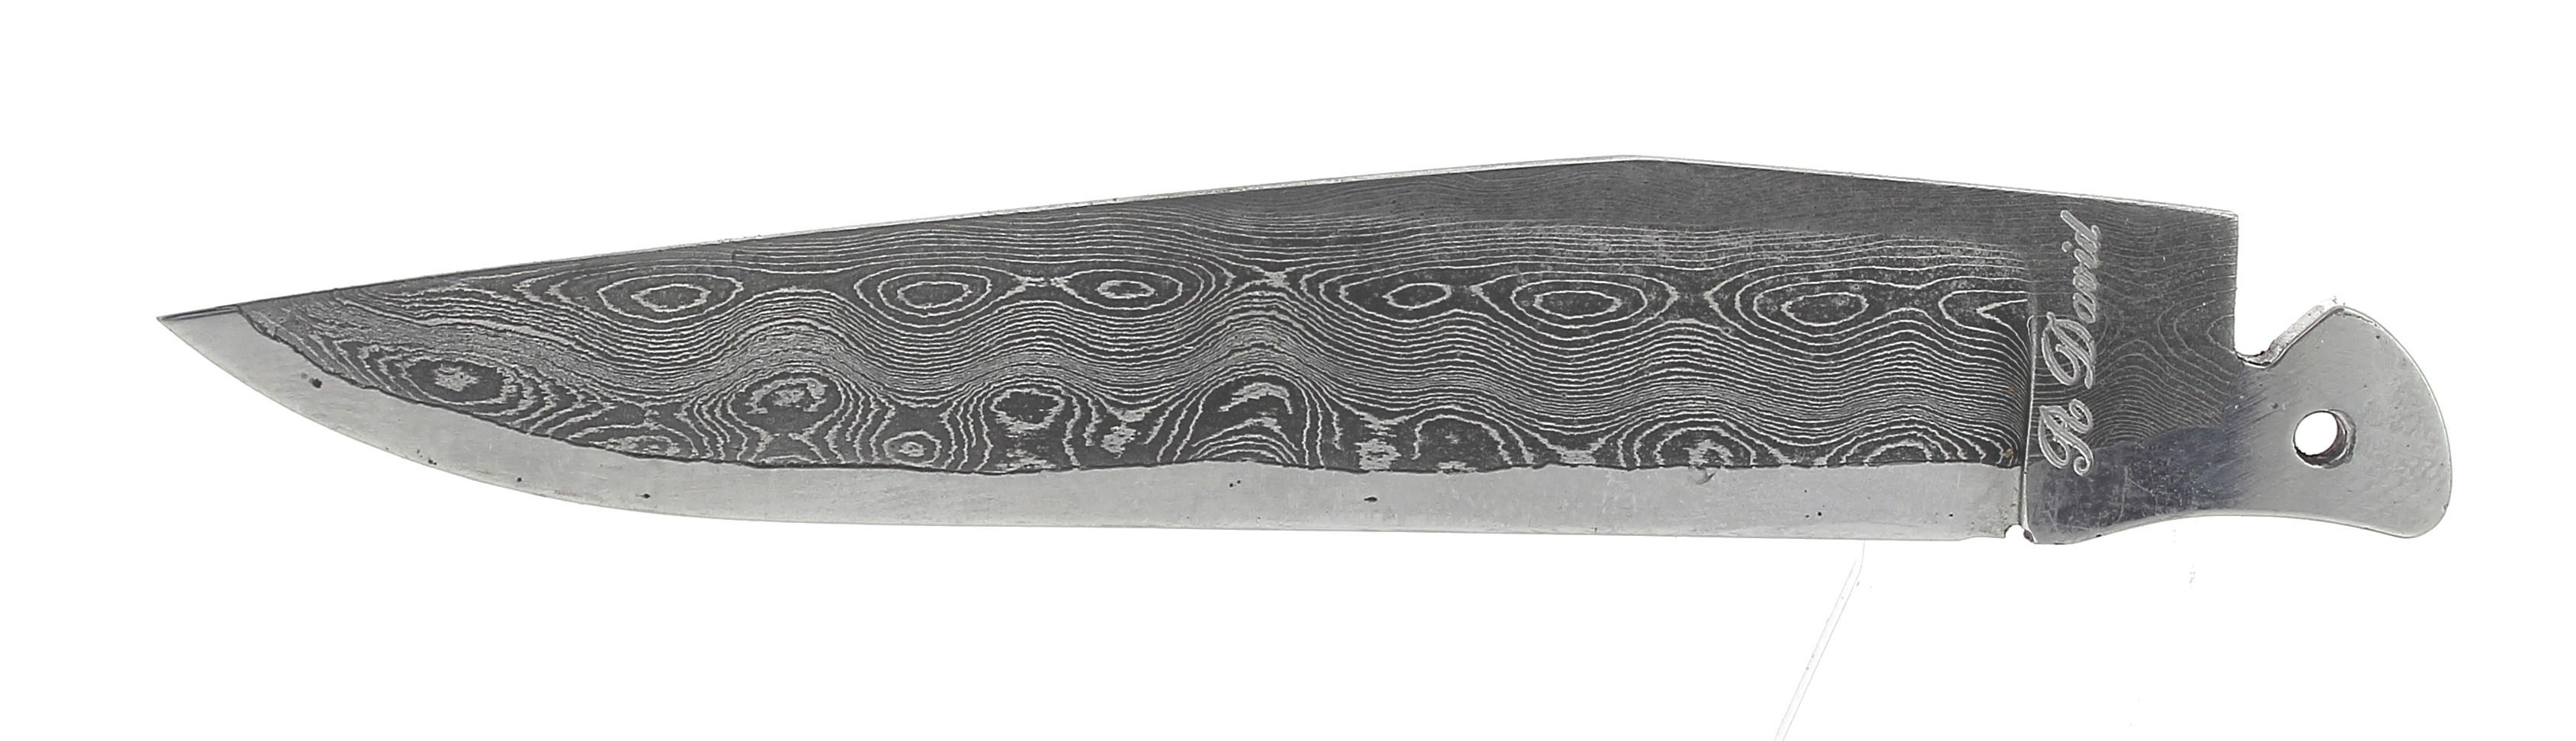 Laguiole knife damask edged reported carbon Rosa